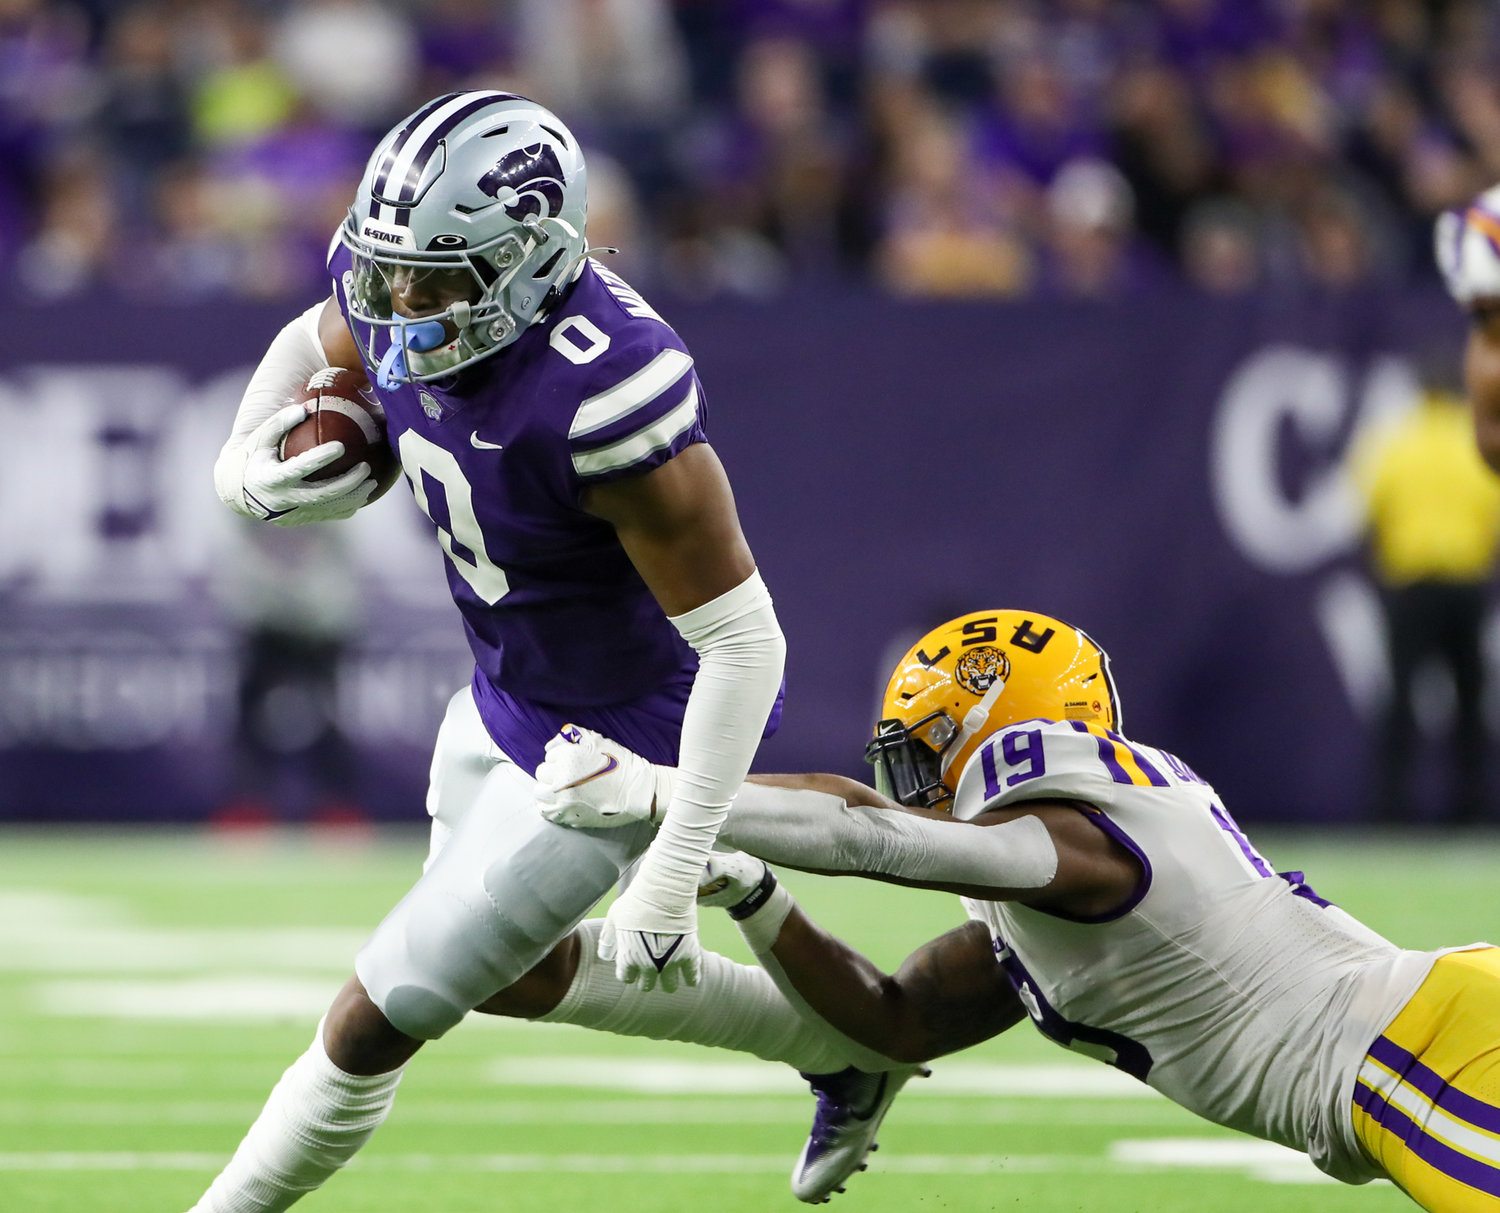 Kansas State Wildcats tight end Daniel Imatorbhebhe (0) carries the ball during the TaxAct Texas Bowl on Jan. 4, 2022 in Houston, Texas.